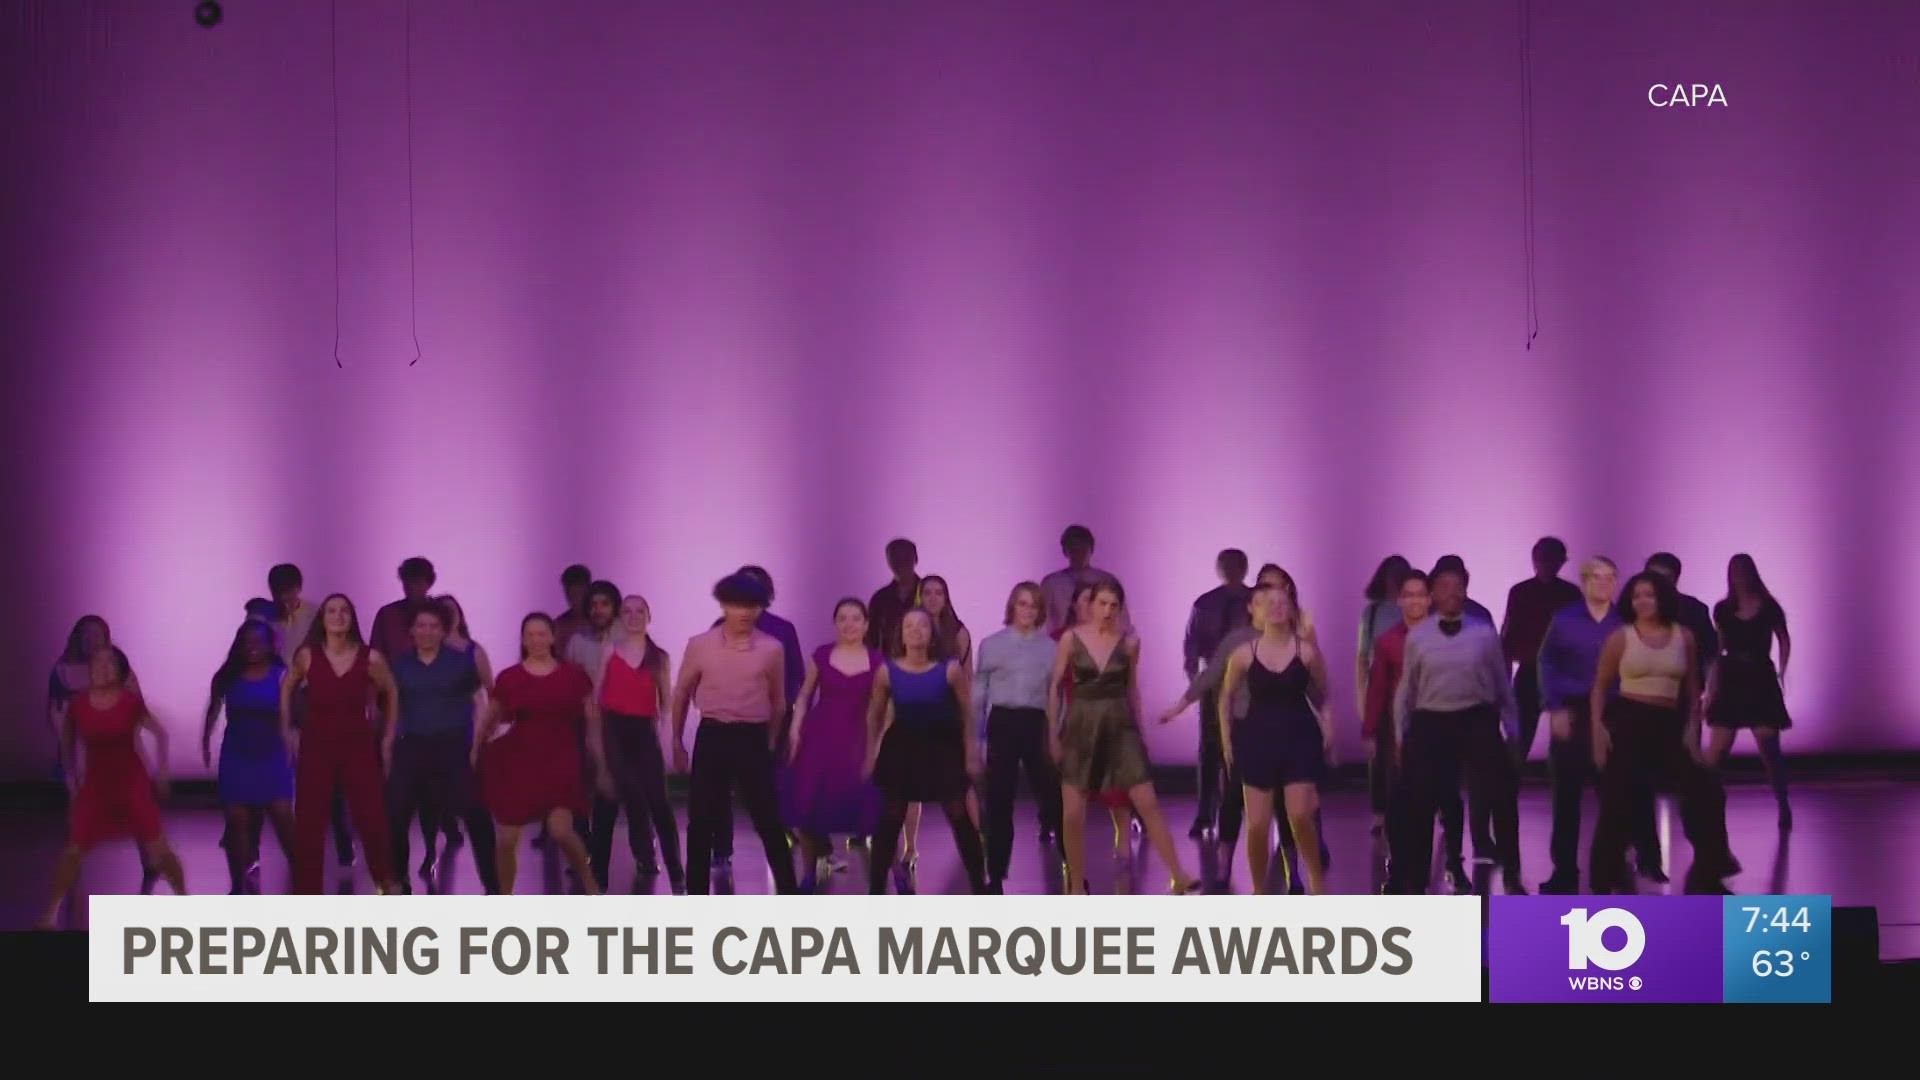 CAPA will roll out the red carpet for students who have been nominated for awards in local theater. The awards are set for May 25th.